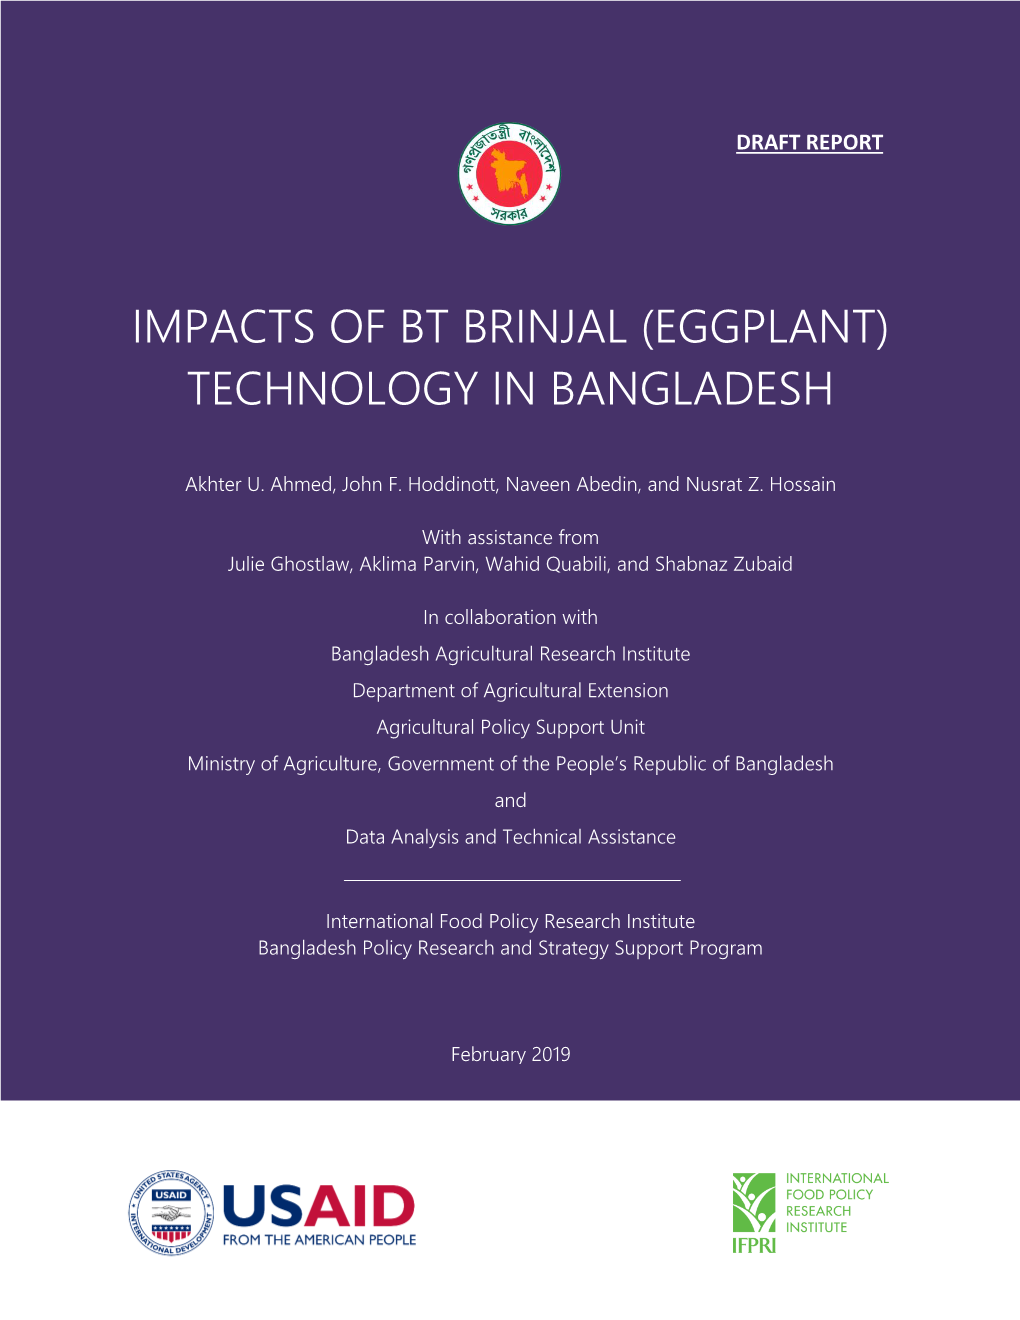 Impacts of Bt Brinjal (Eggplant) Technology in Bangladesh